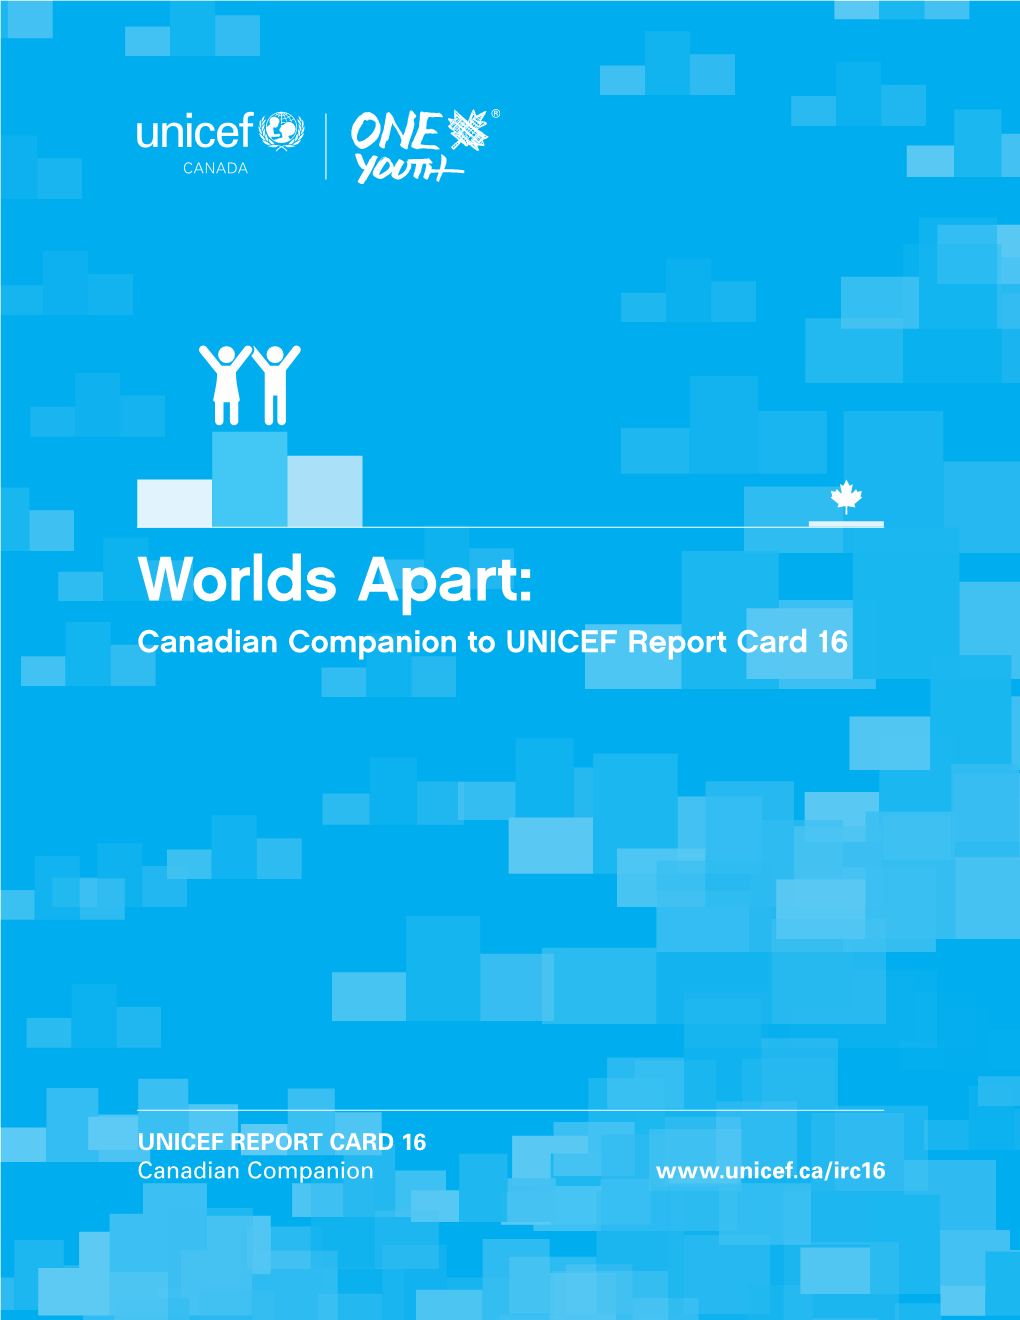 Worlds Apart: Canadian Companion to UNICEF Report Card 16